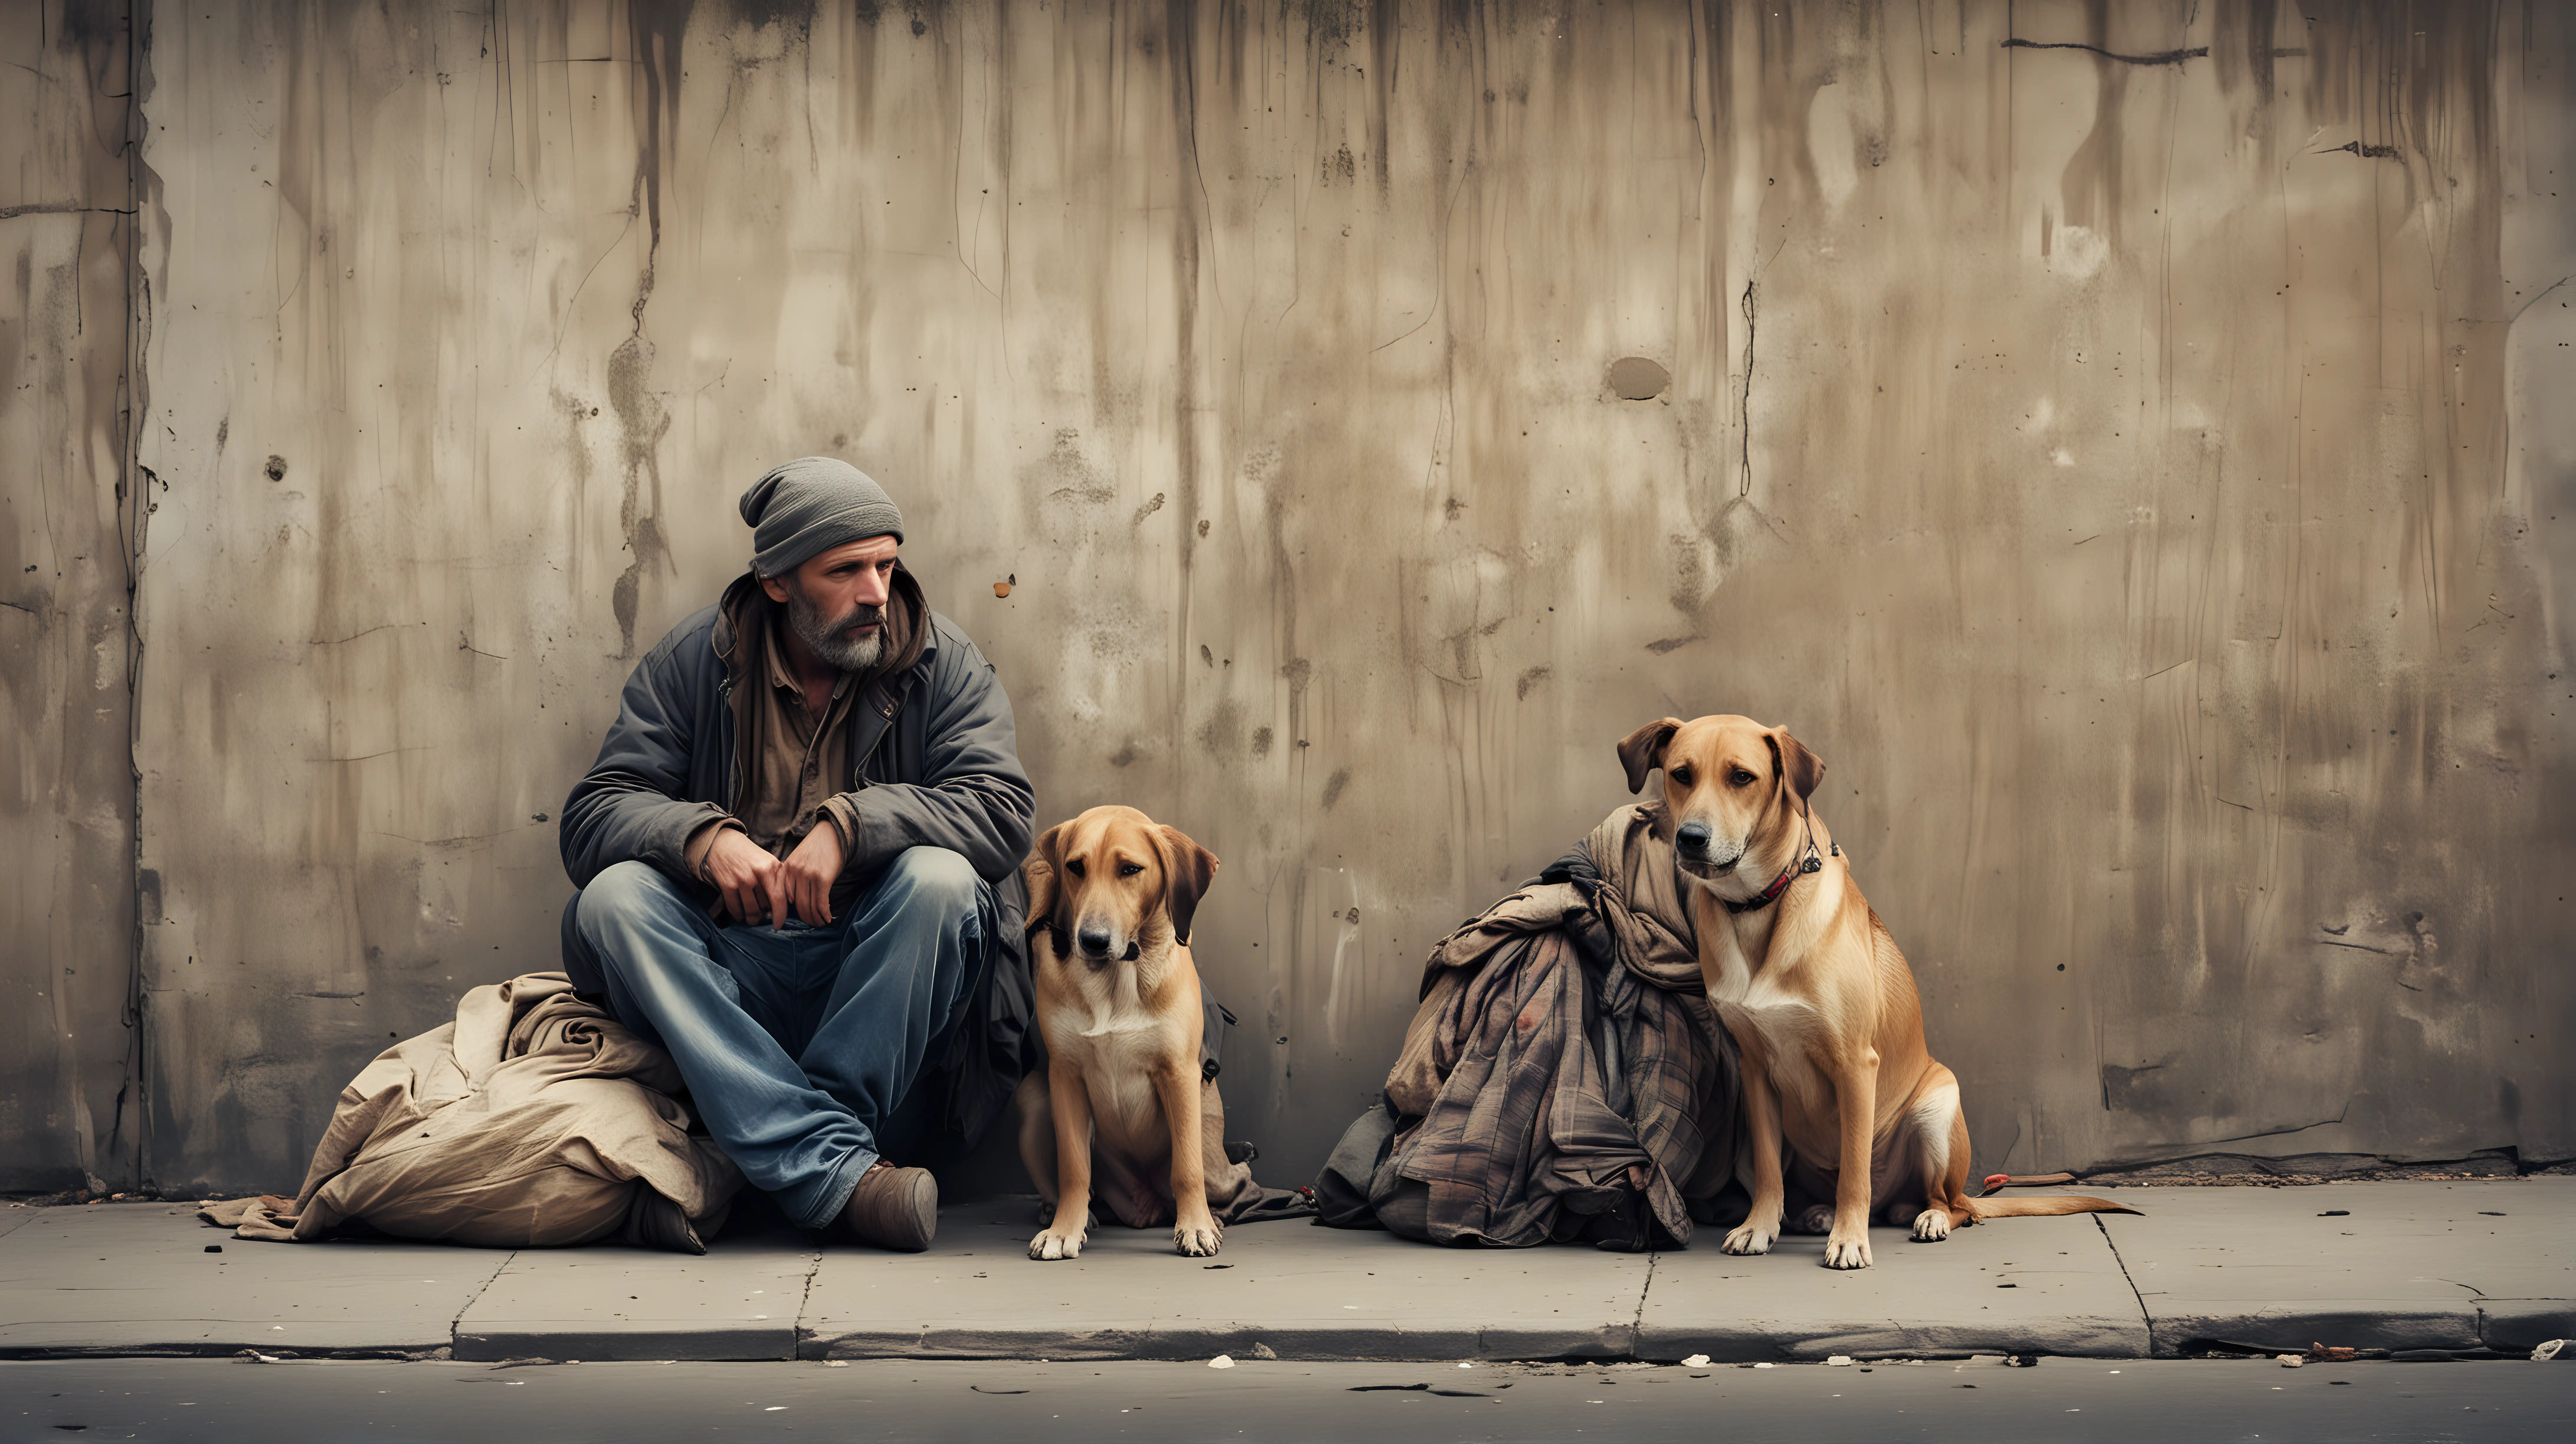 Homeless Man with Dog on Grungy City Street Wall